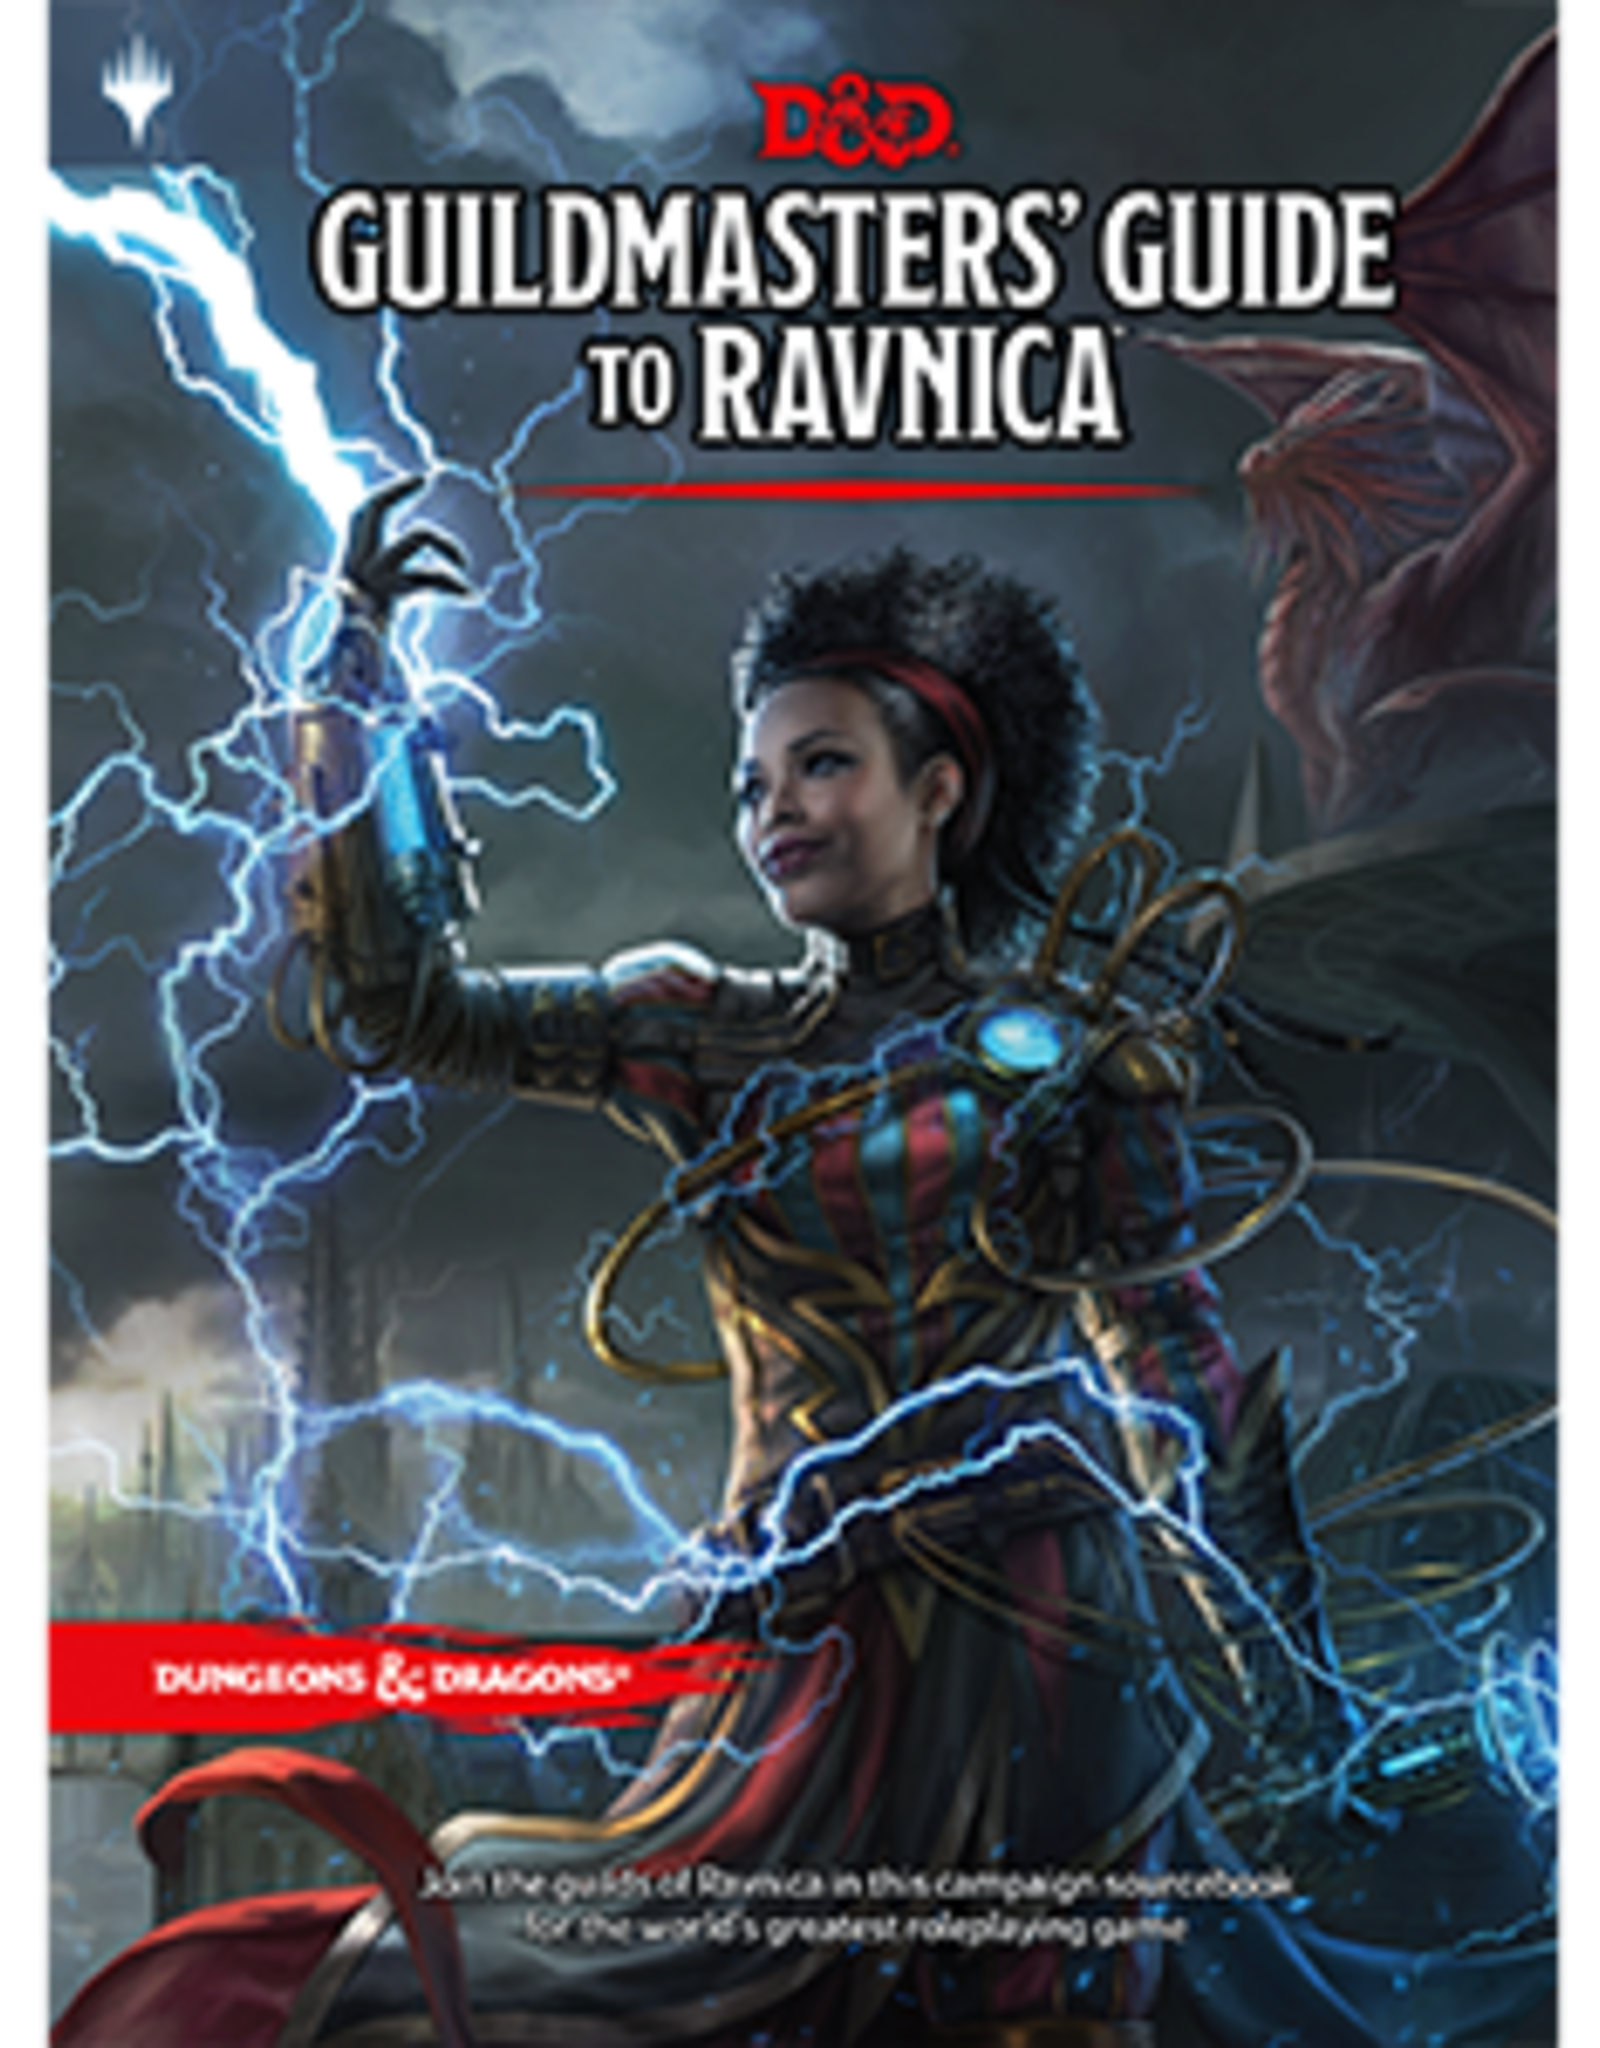 Wizards of the Coast Dungeons & Dragons Guildmaster's Guide to Ravnica